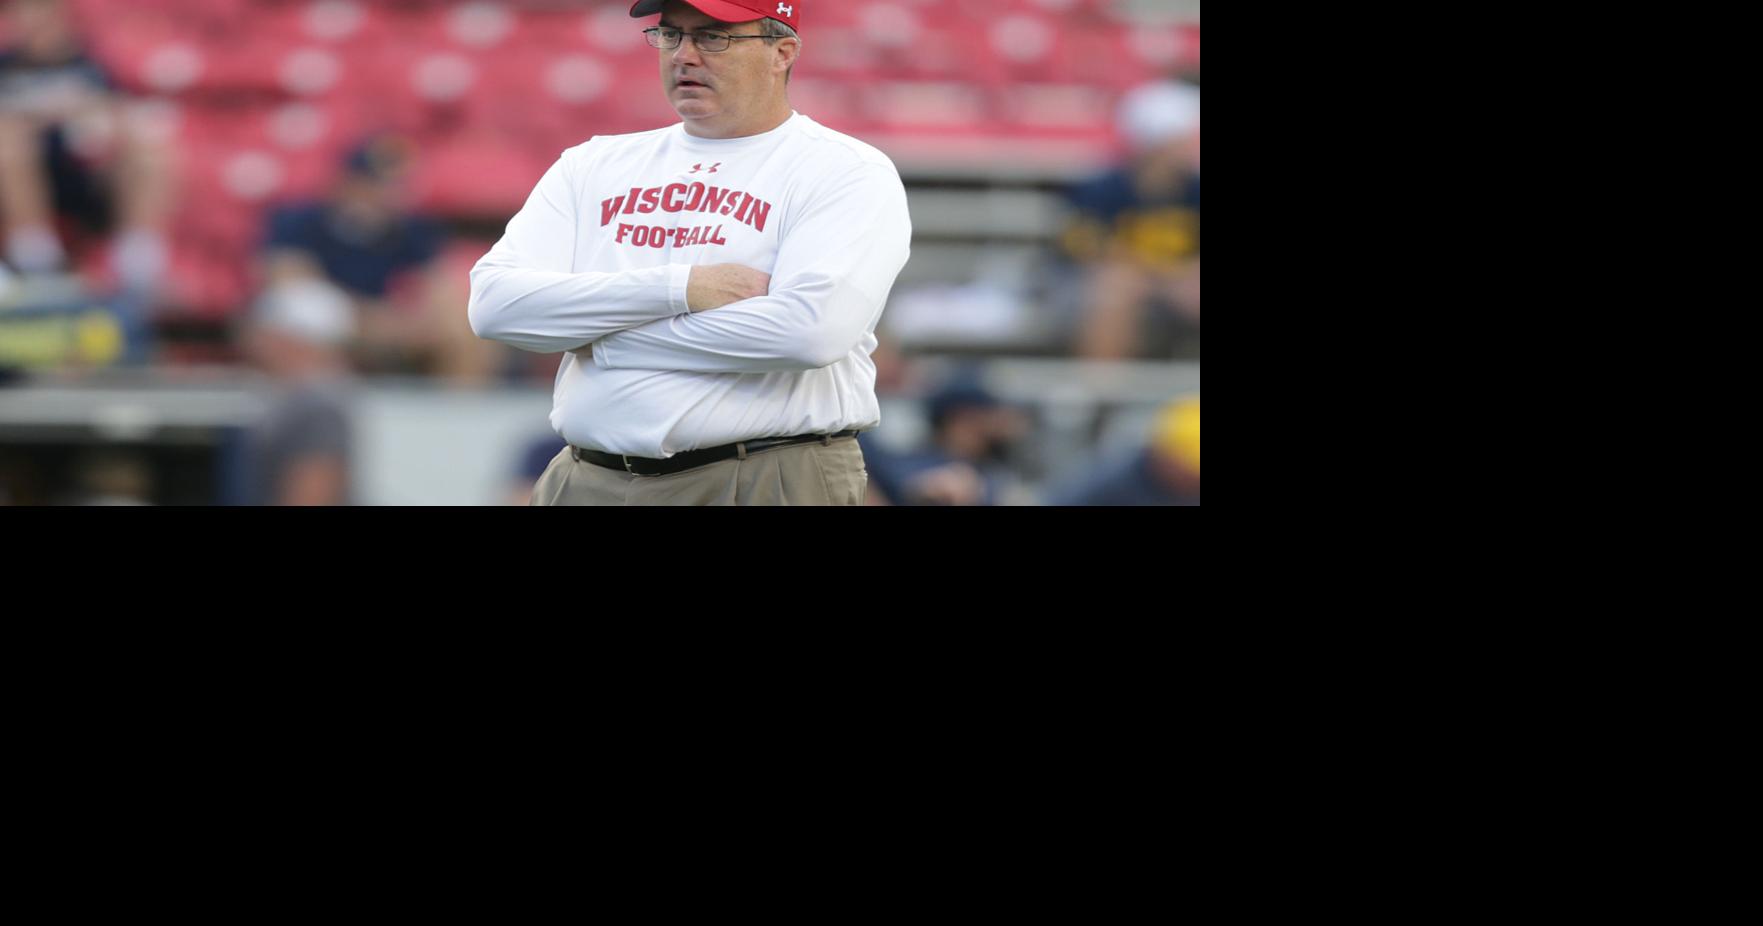 What it means for Wisconsin to repost its assistant football coach position